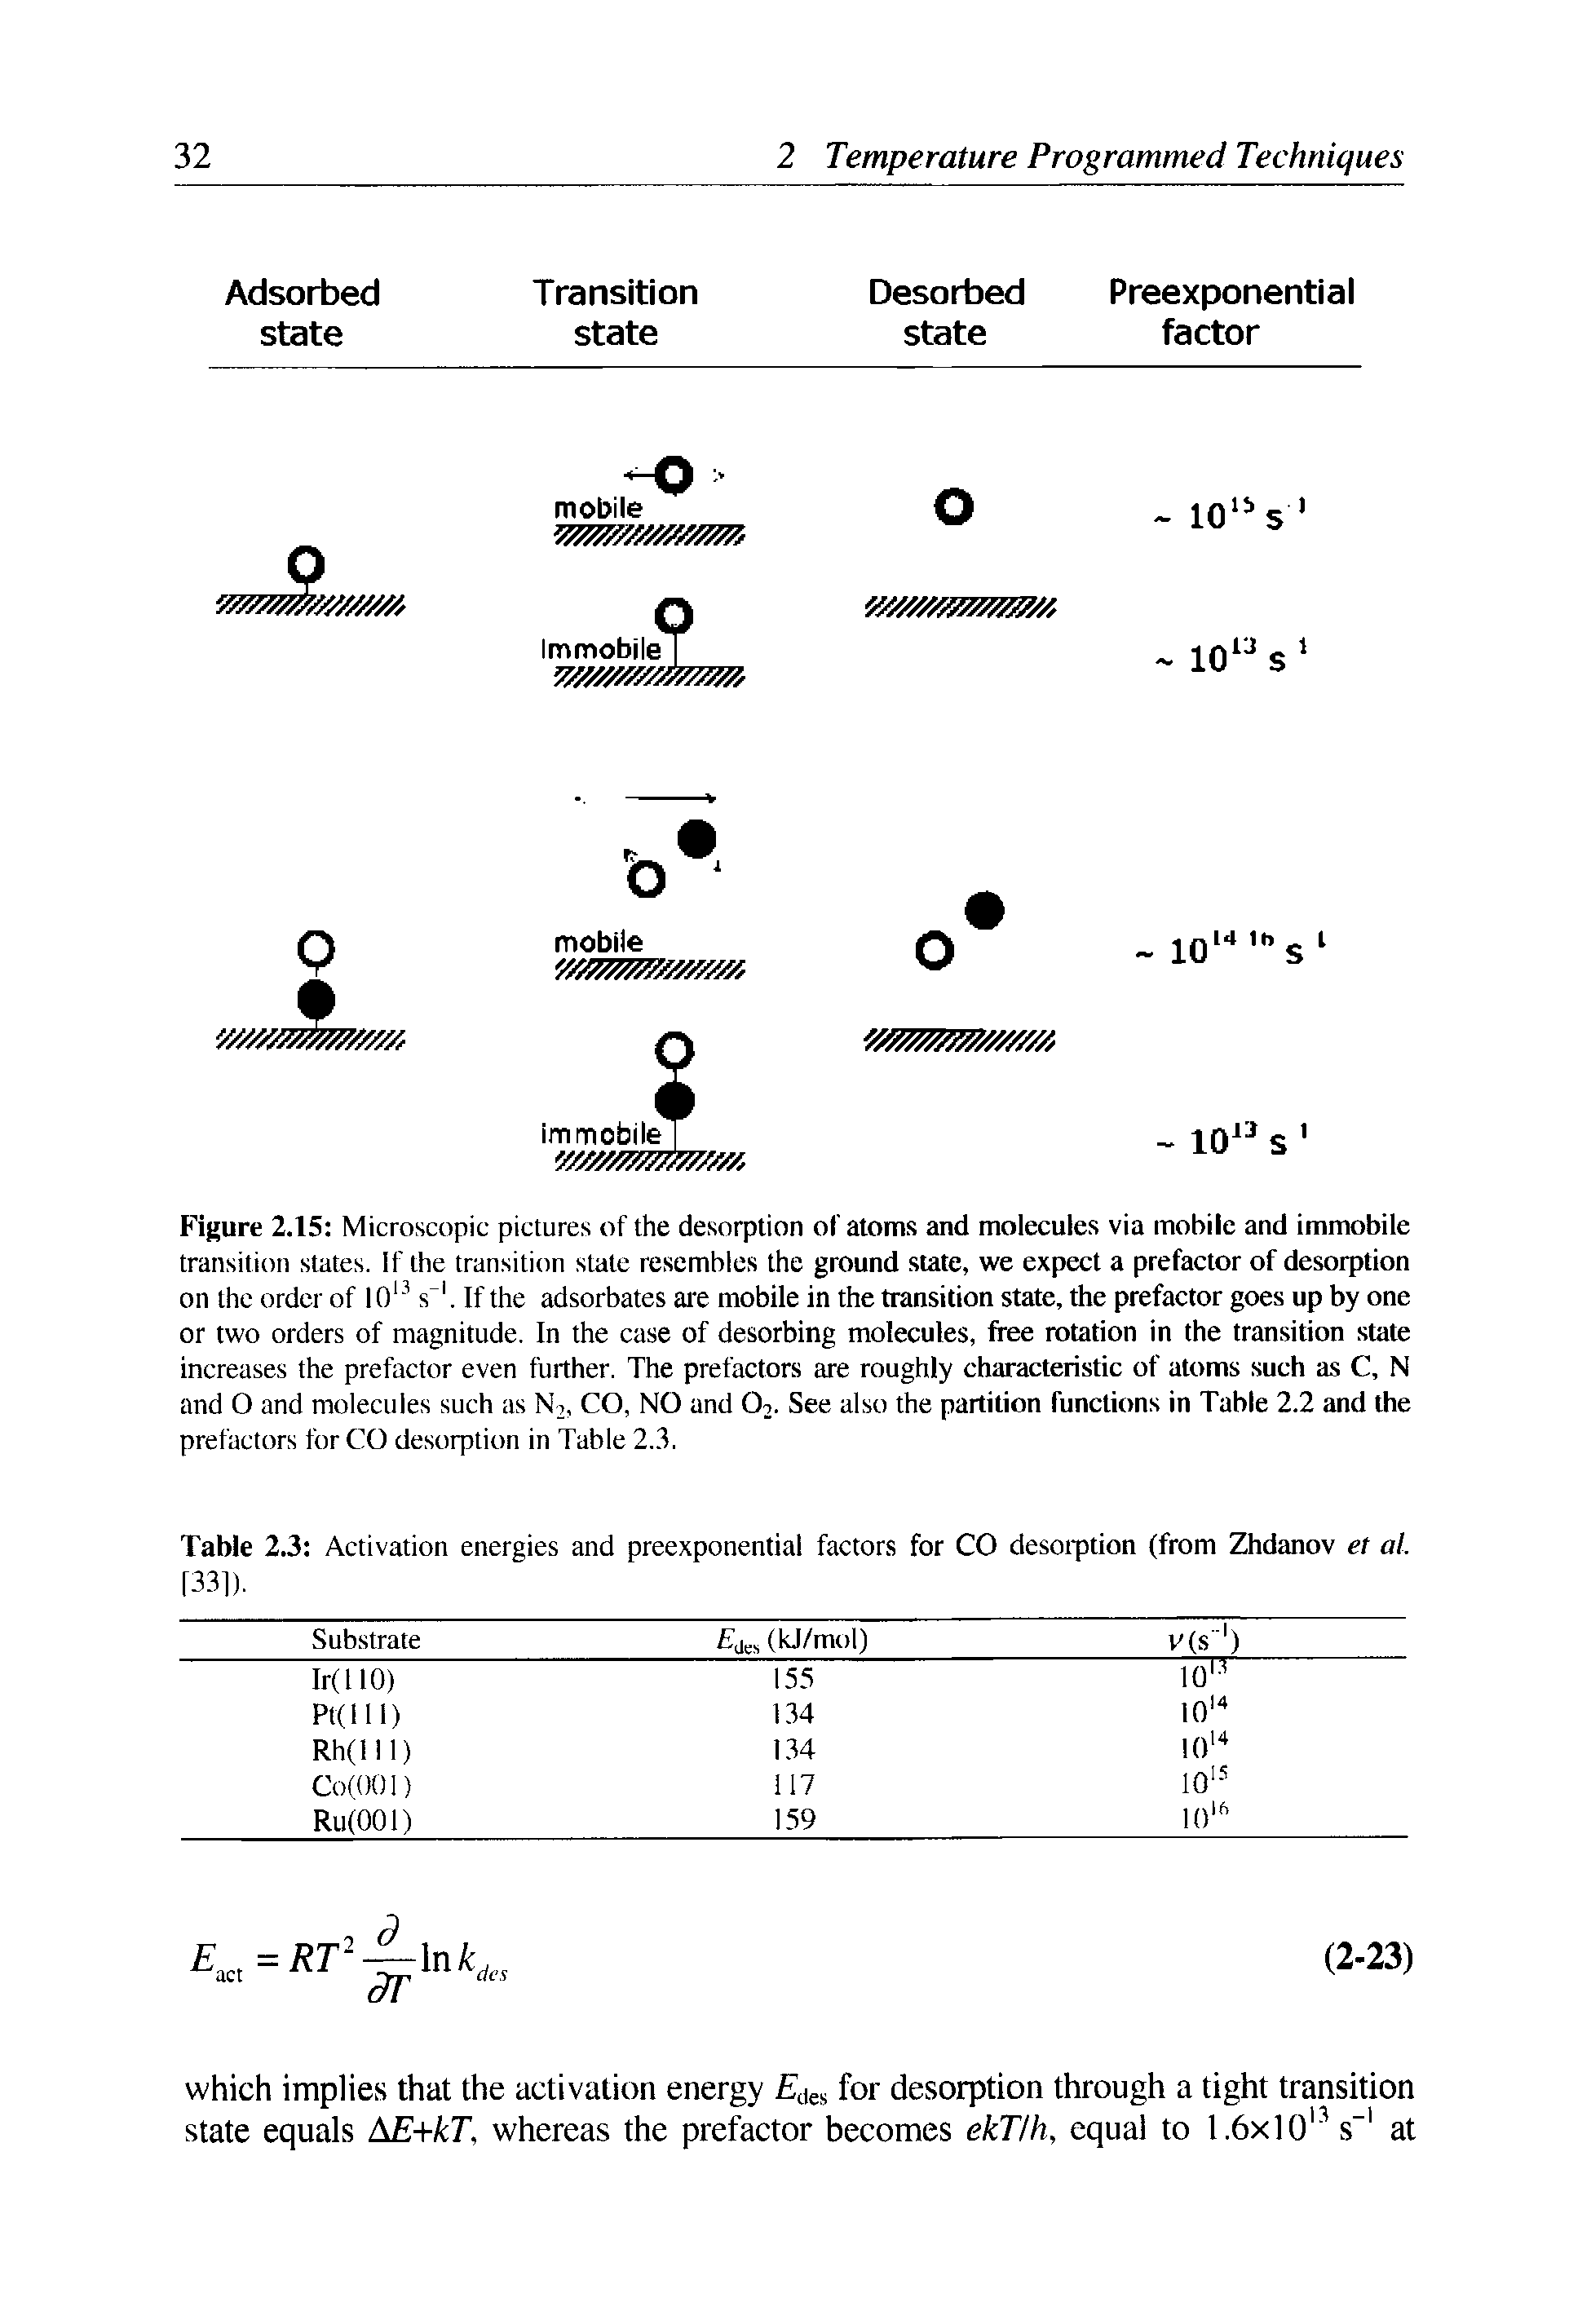 Table 2.3 Activation energies and preexponential factors for CO desoiption (from Zhdanov et al. [331).